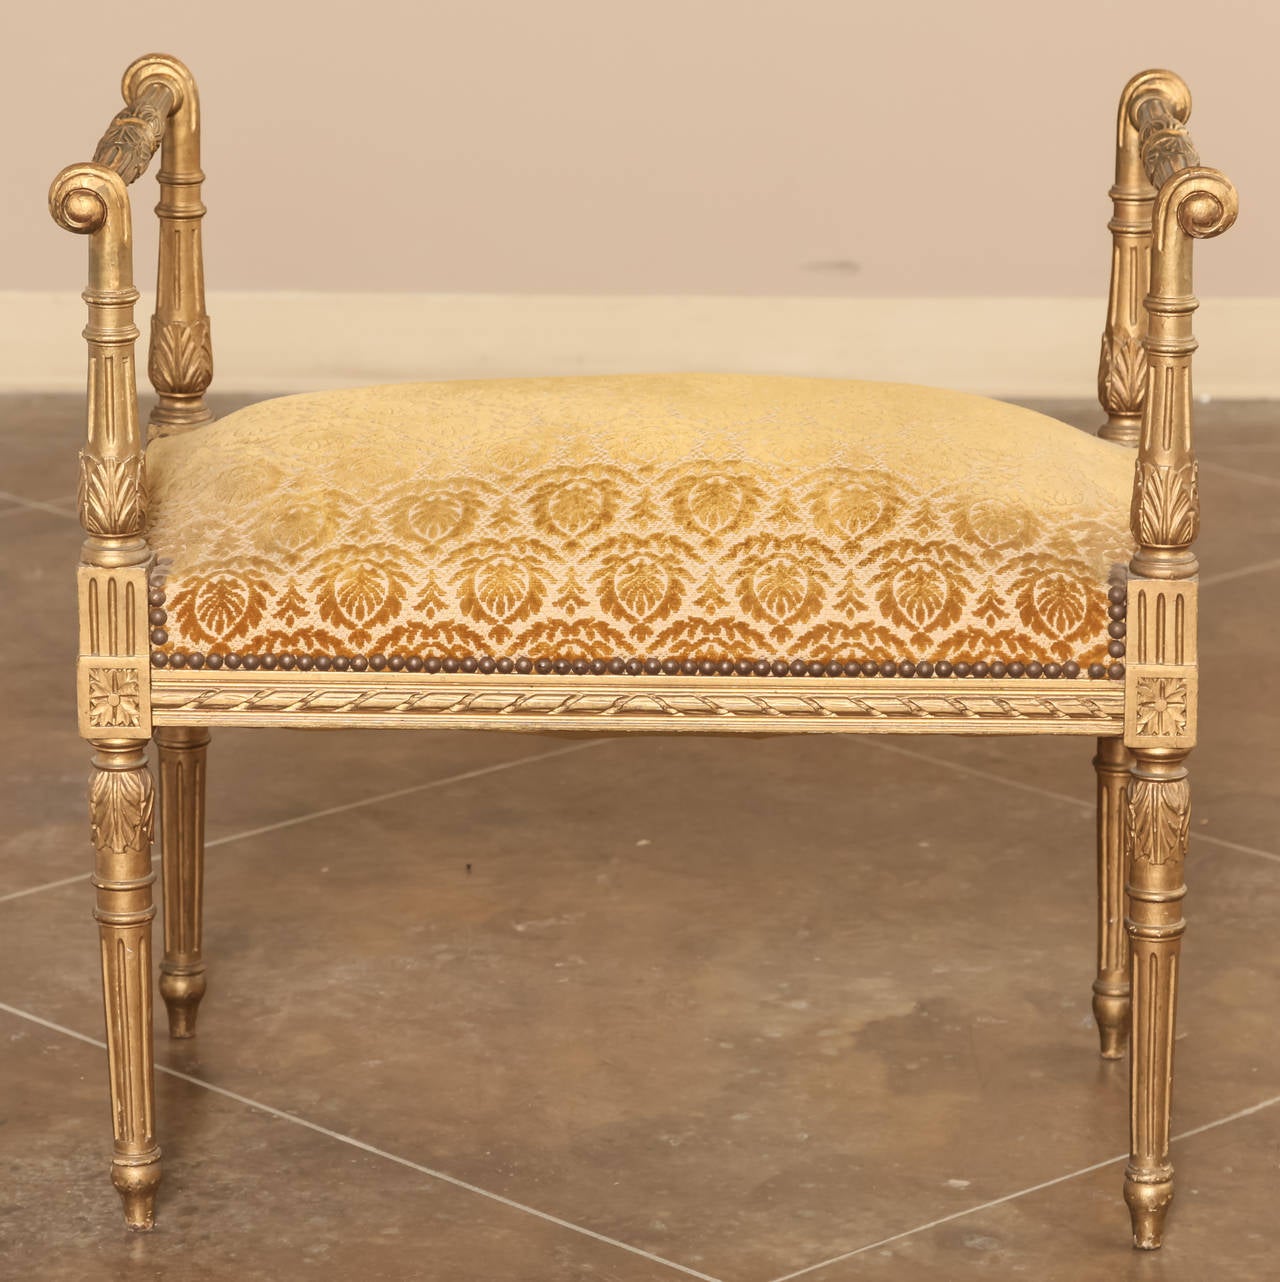 Louis XVI gilded vanity bench is a great choice for the bathroom, bedroom, or anywhere an elegant bench is needed. Classical styling with tapered and fluted columns catches the eye, while the gold finish adds opulence. Upholstery is in serviceable